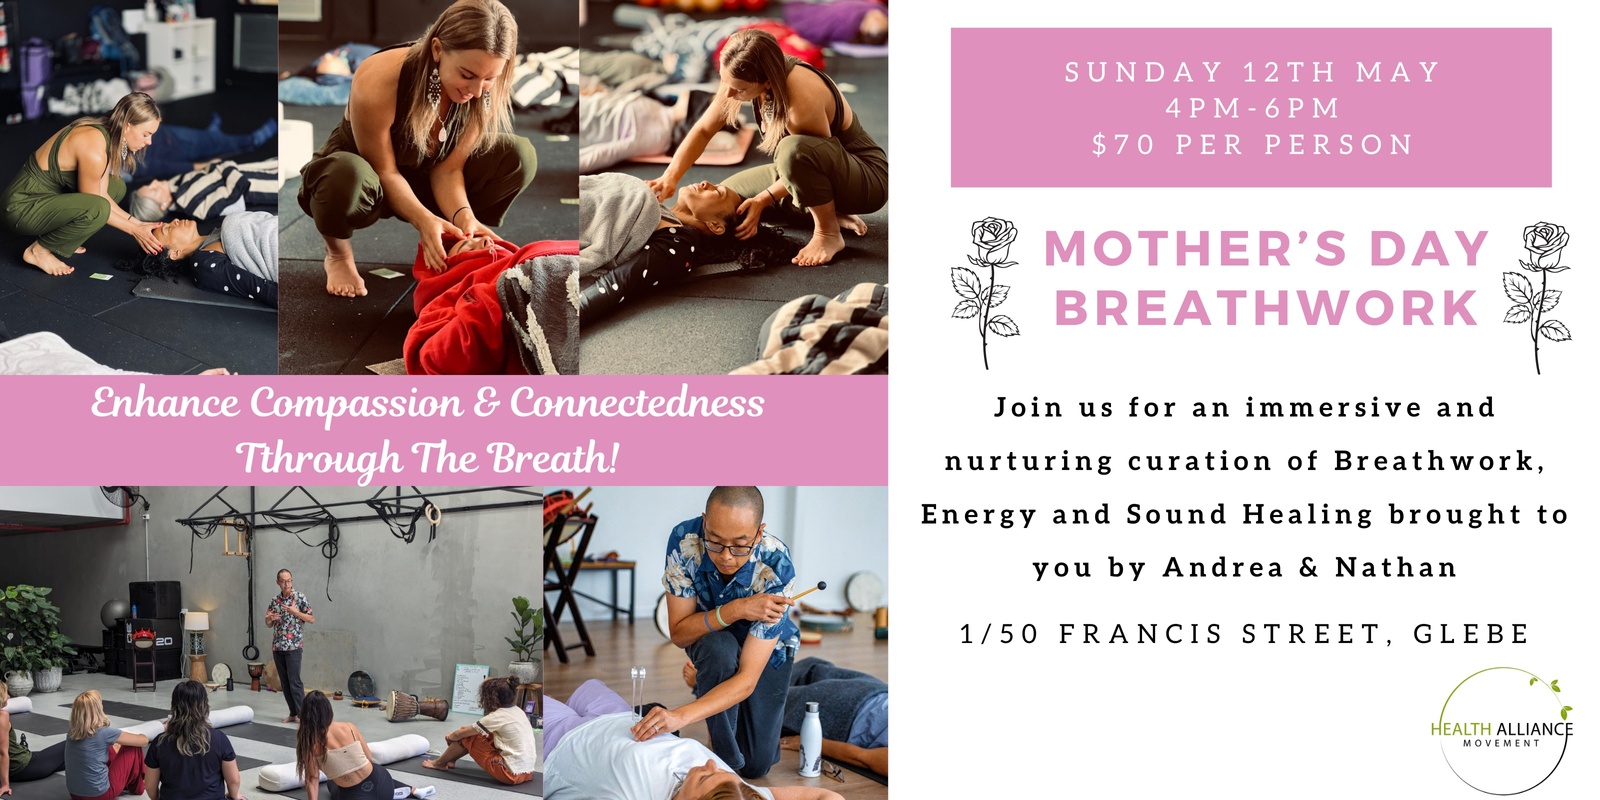 Banner image for Mother's Day Breathwork for Compassion & Connectedness